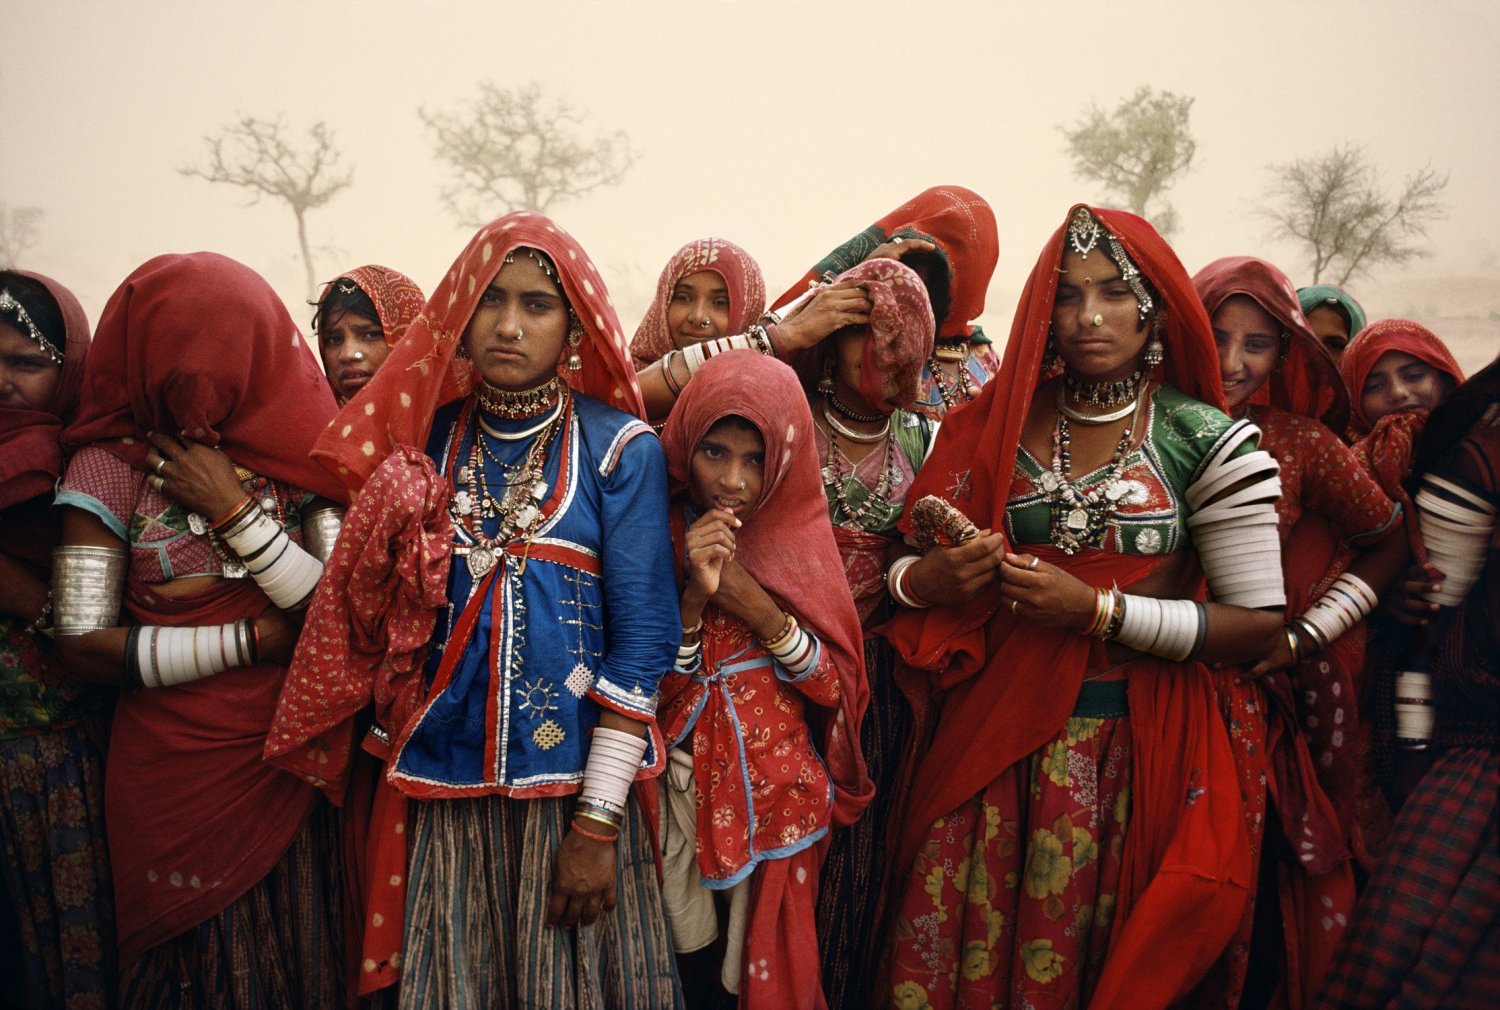 Steve-McCurry-Cluster-of-women-during-a-dust-storm-Rajasthan-India-1983.jpg